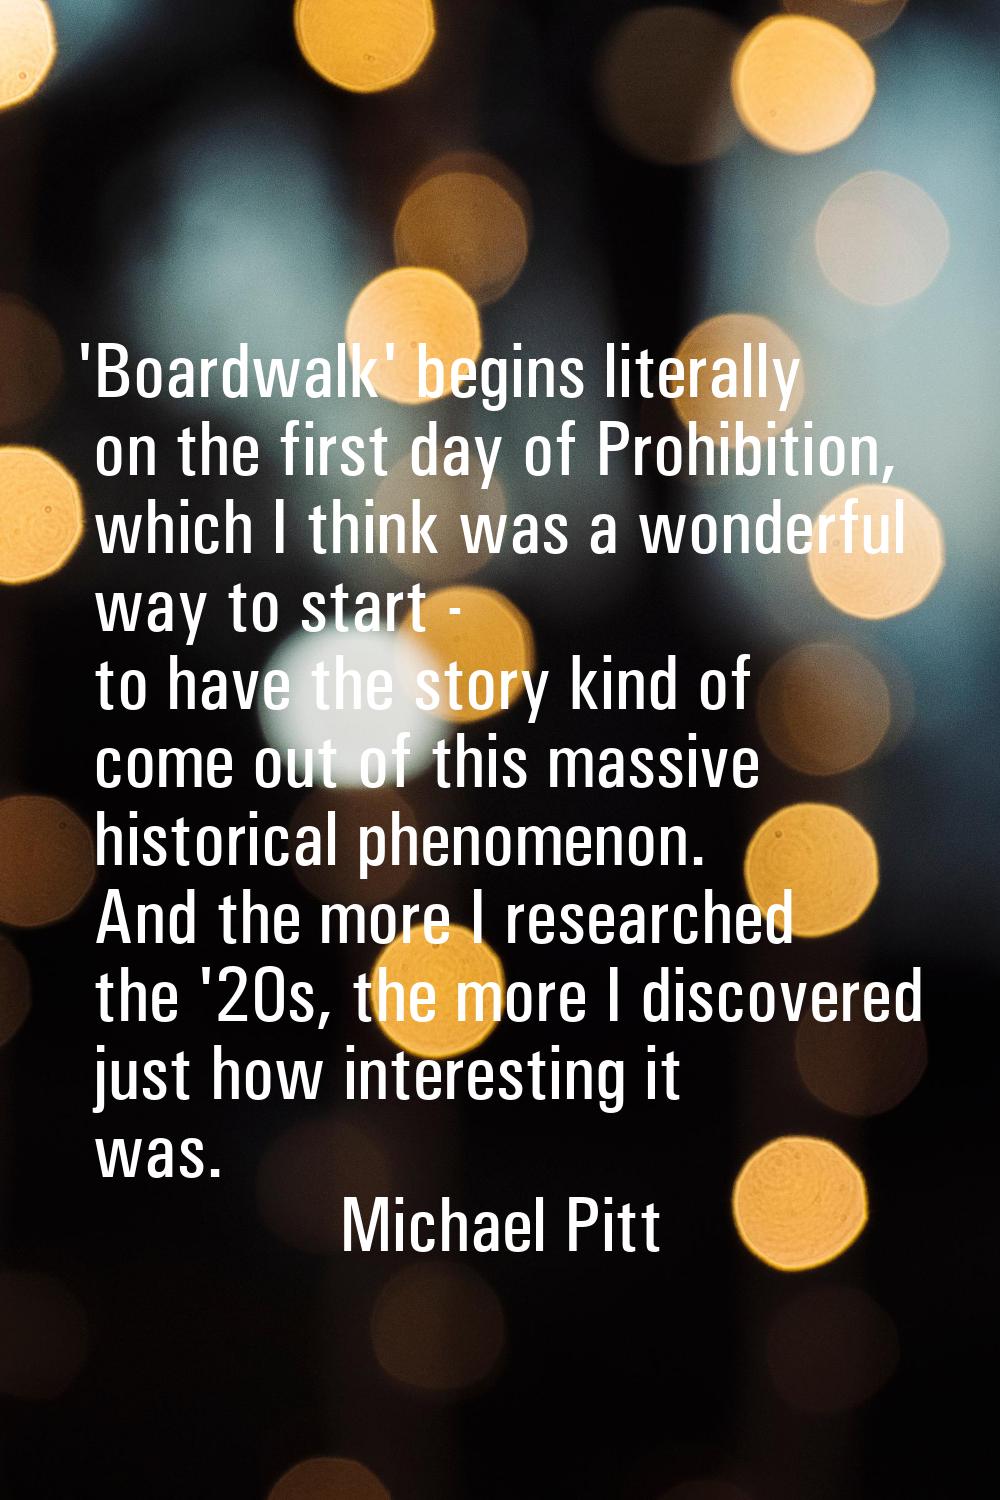 'Boardwalk' begins literally on the first day of Prohibition, which I think was a wonderful way to 